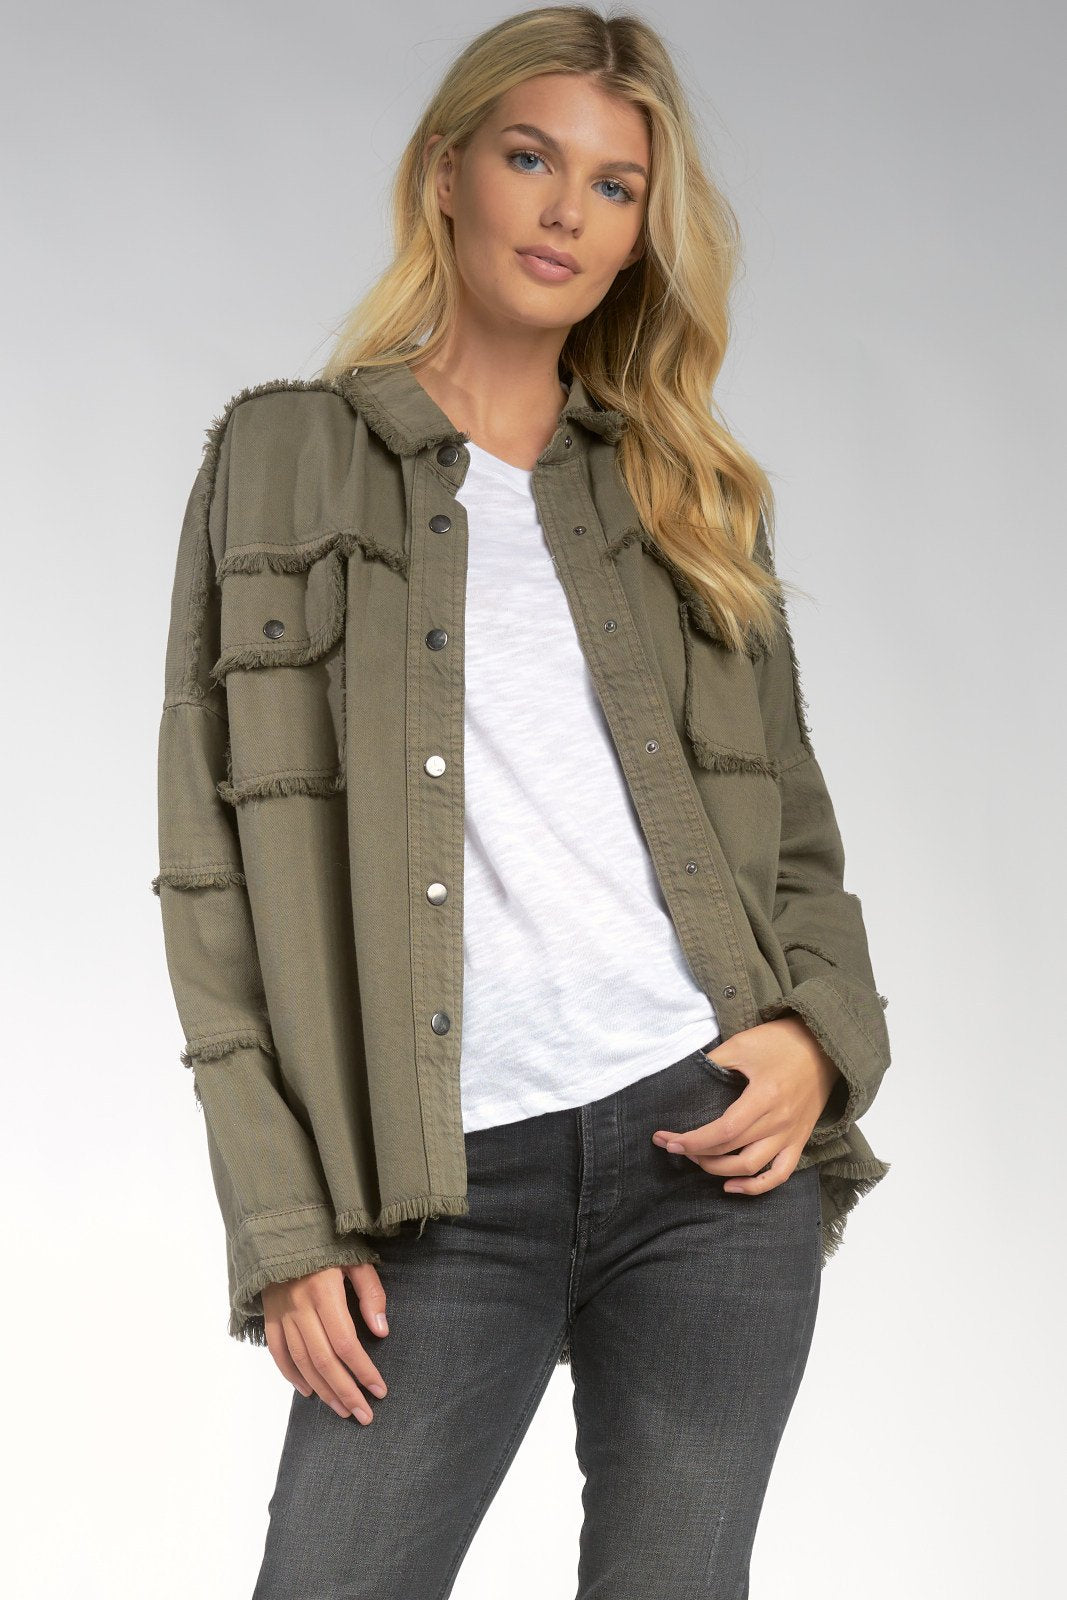 All You Need Is Love Jacket | Olive - Main Image Number 2 of 2